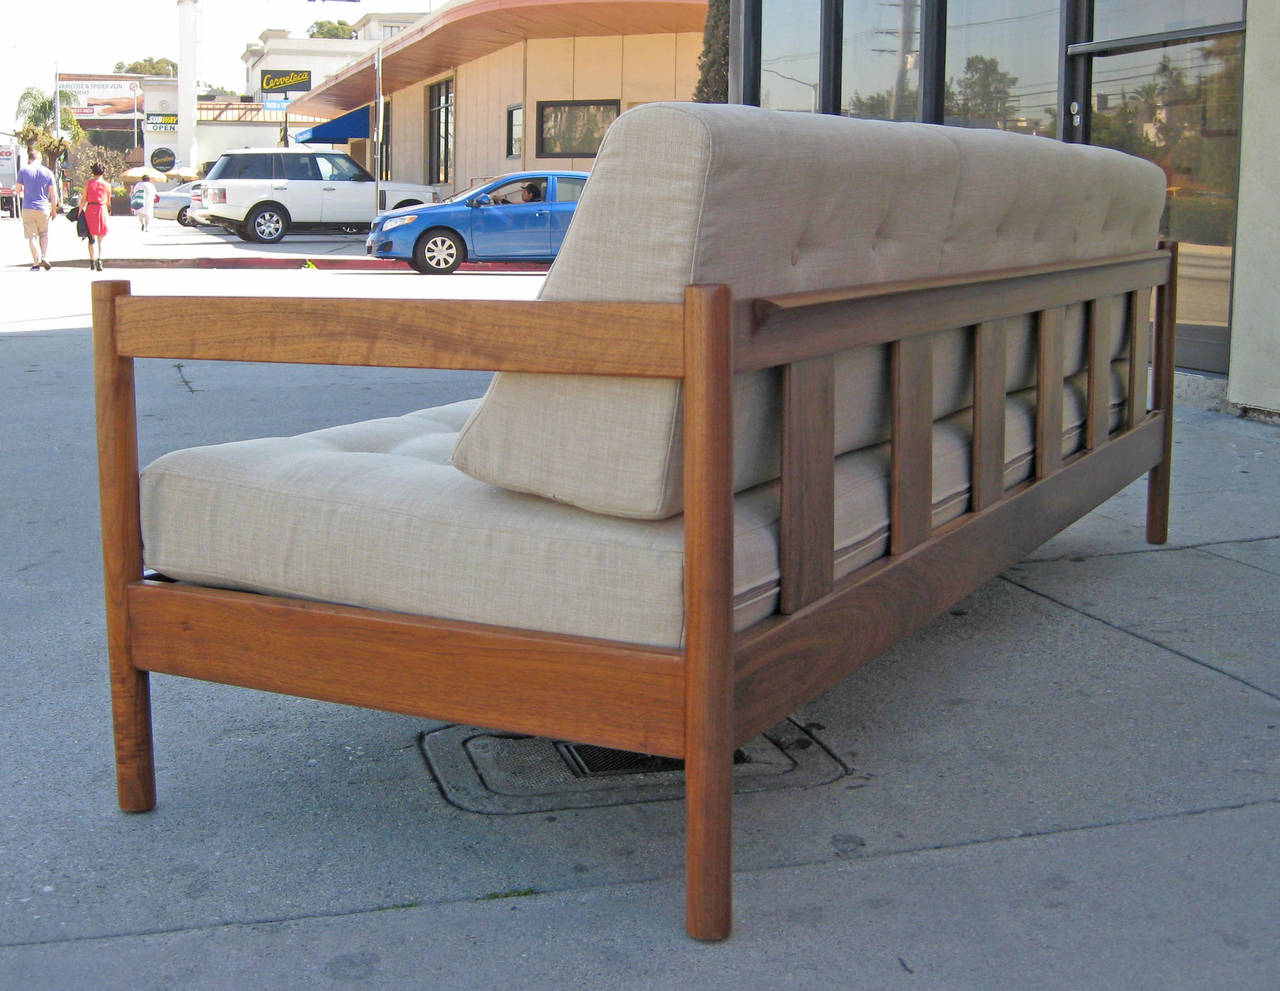 Danish teak sofa with its matching chair upholstered in cream canvas.
Very comfortable!

The listed dimensions are for the sofa.
Here are the chair ones:
31